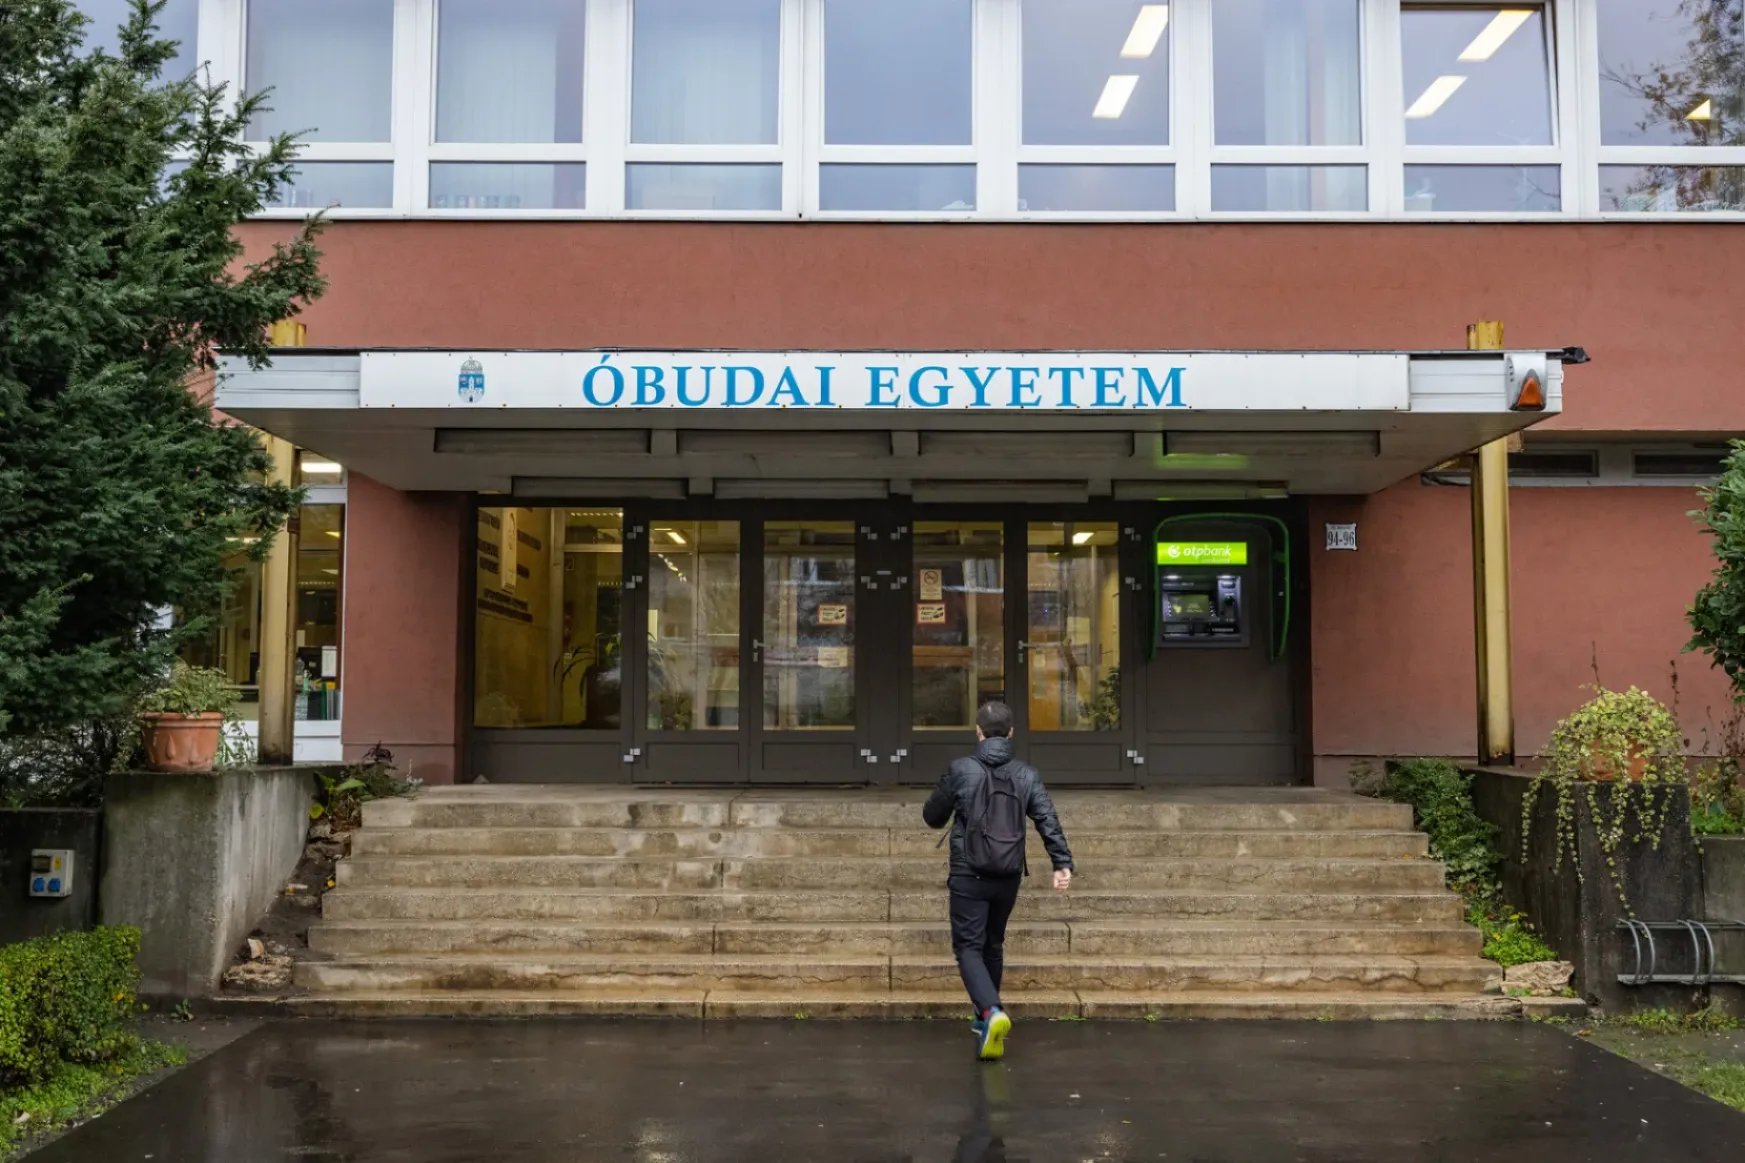 One hyper-prolific researcher may have boosted Óbuda University's international ranking